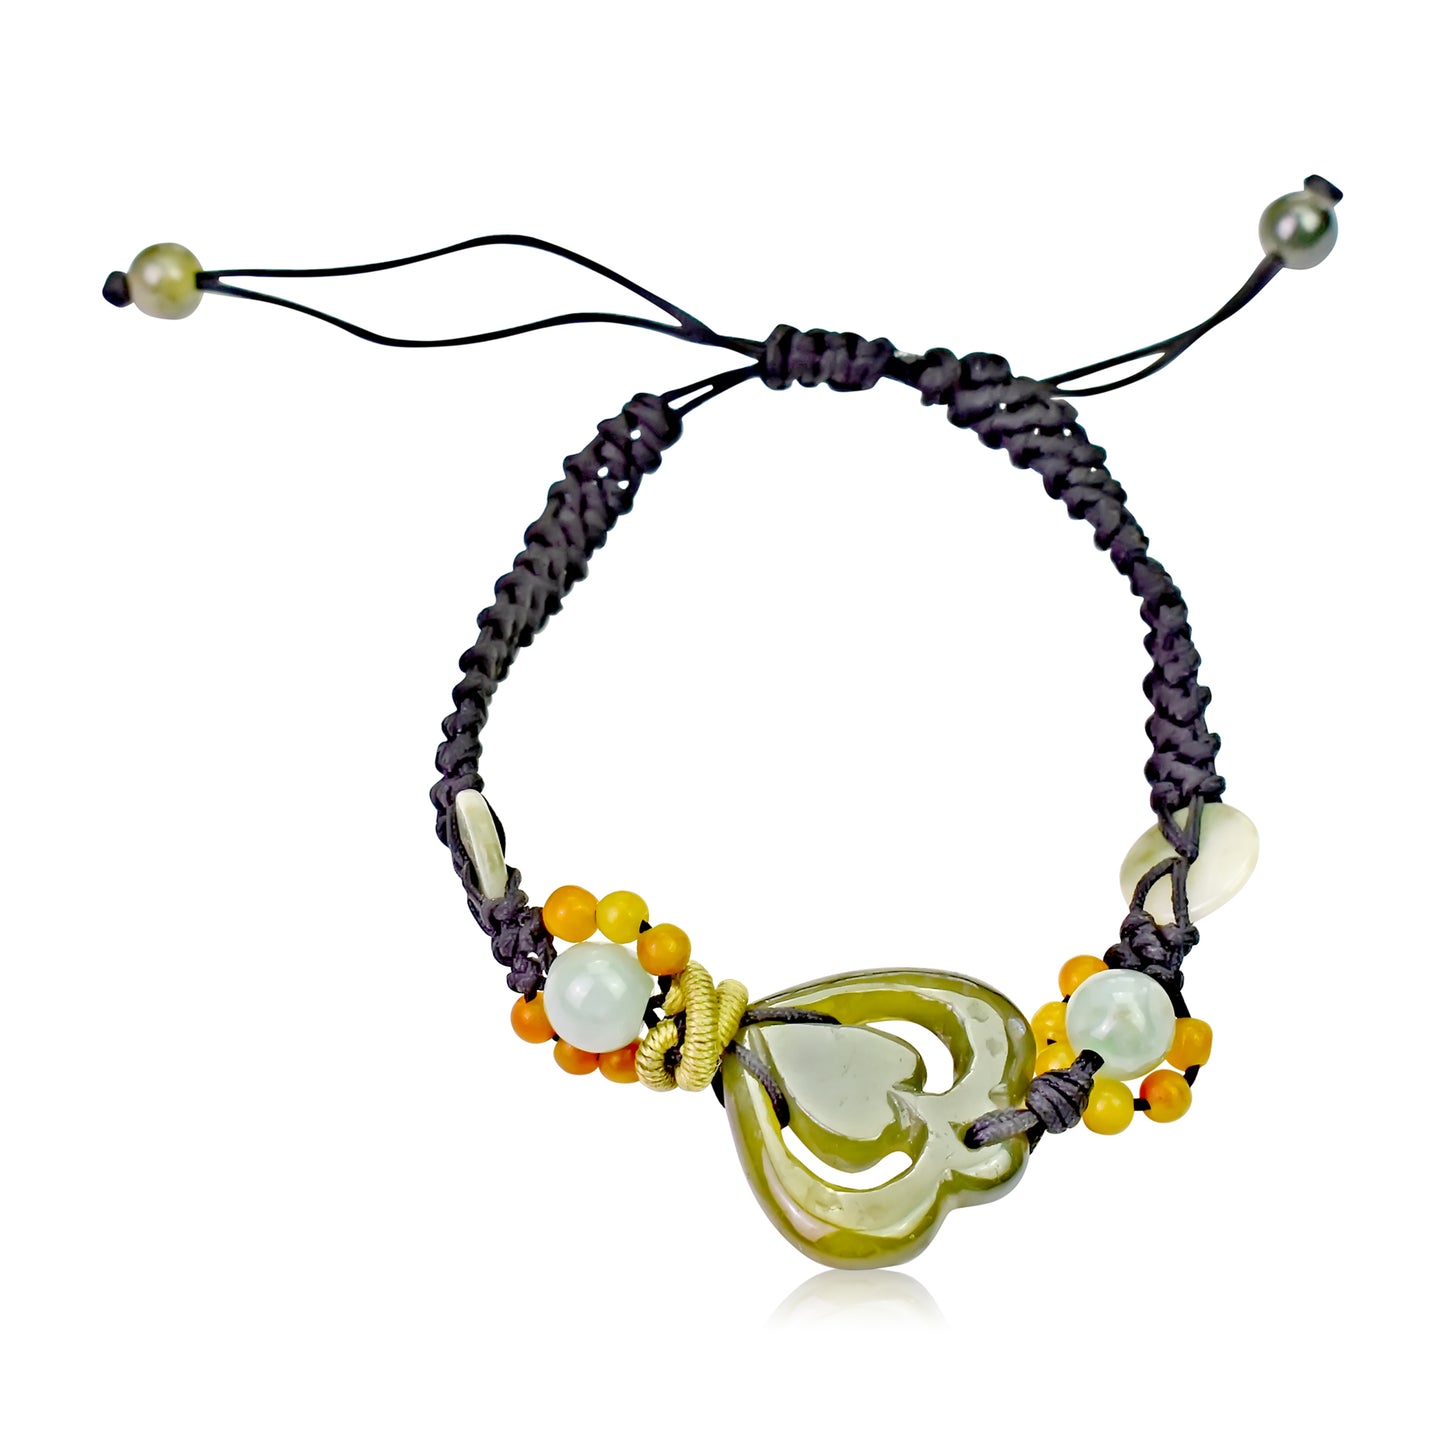 Get Ready for Love with the Heart Honey Jade Bracelet made with Black Cord